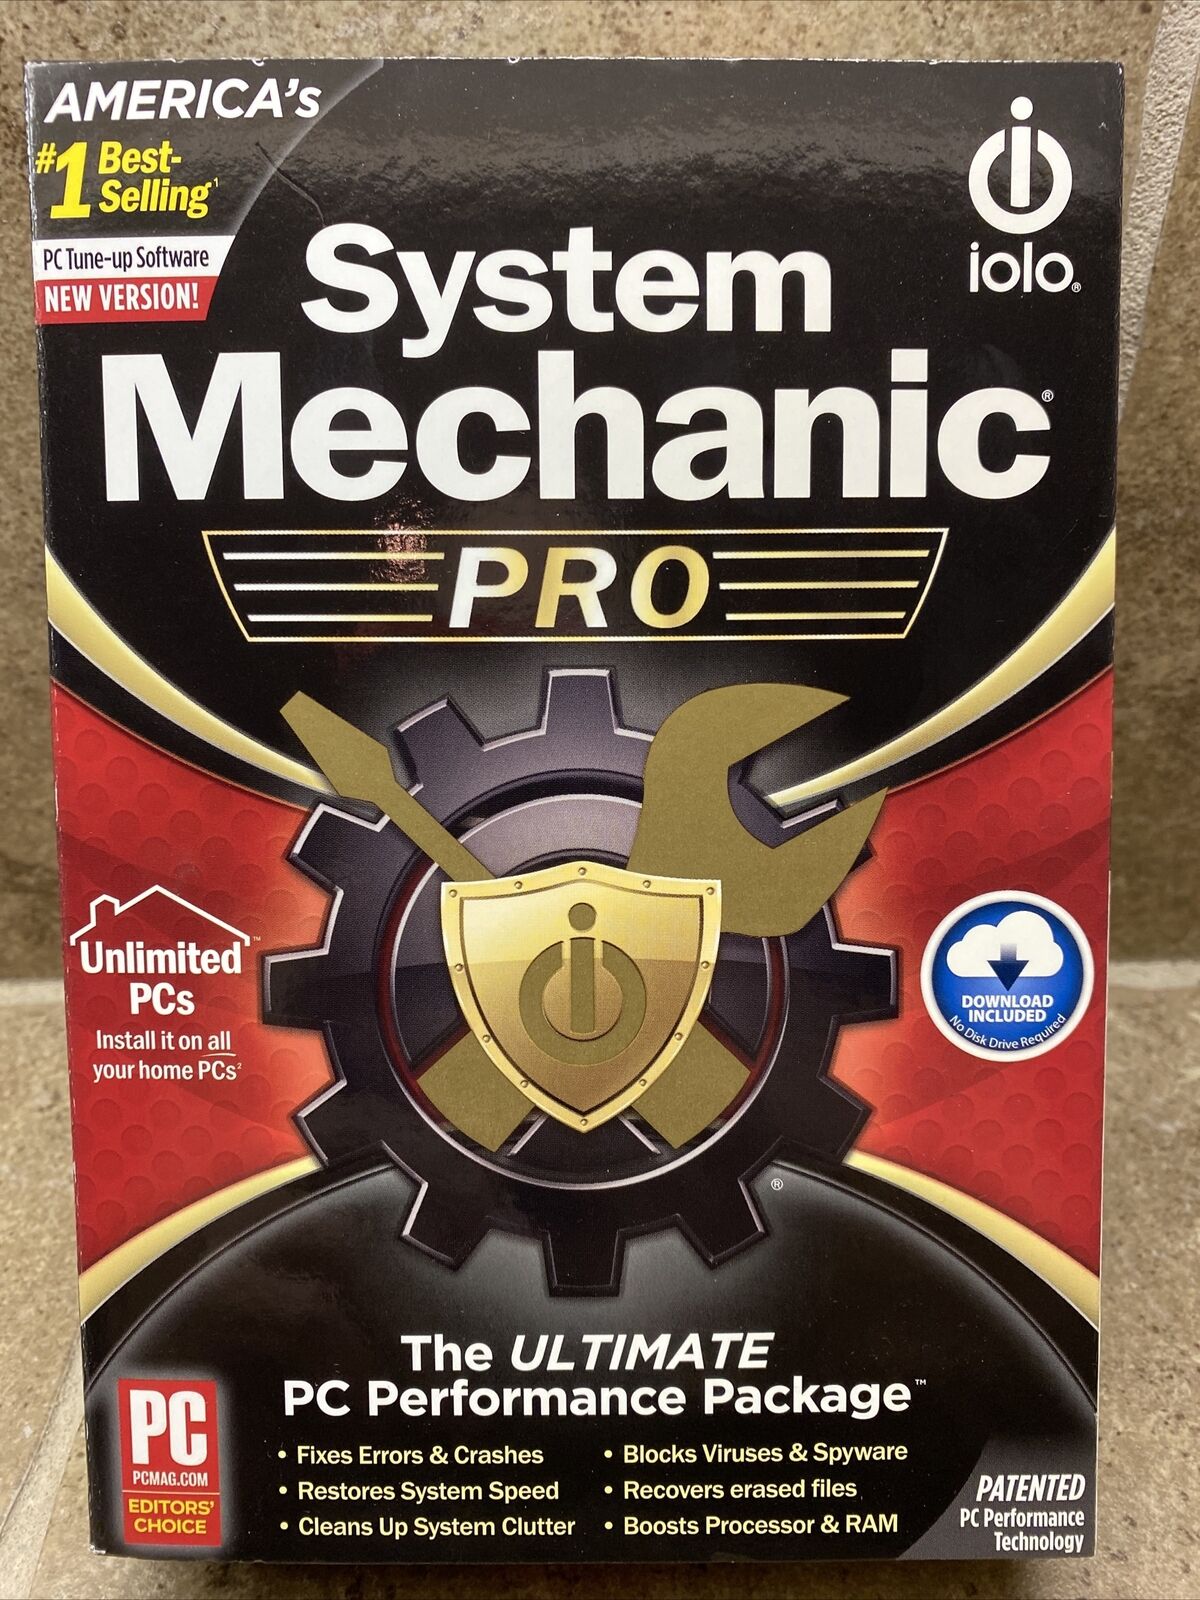 🔥System Mechanic Pro Unlimited PCs SEALED Retail Box BRAND NEW BEST DEAL🔥